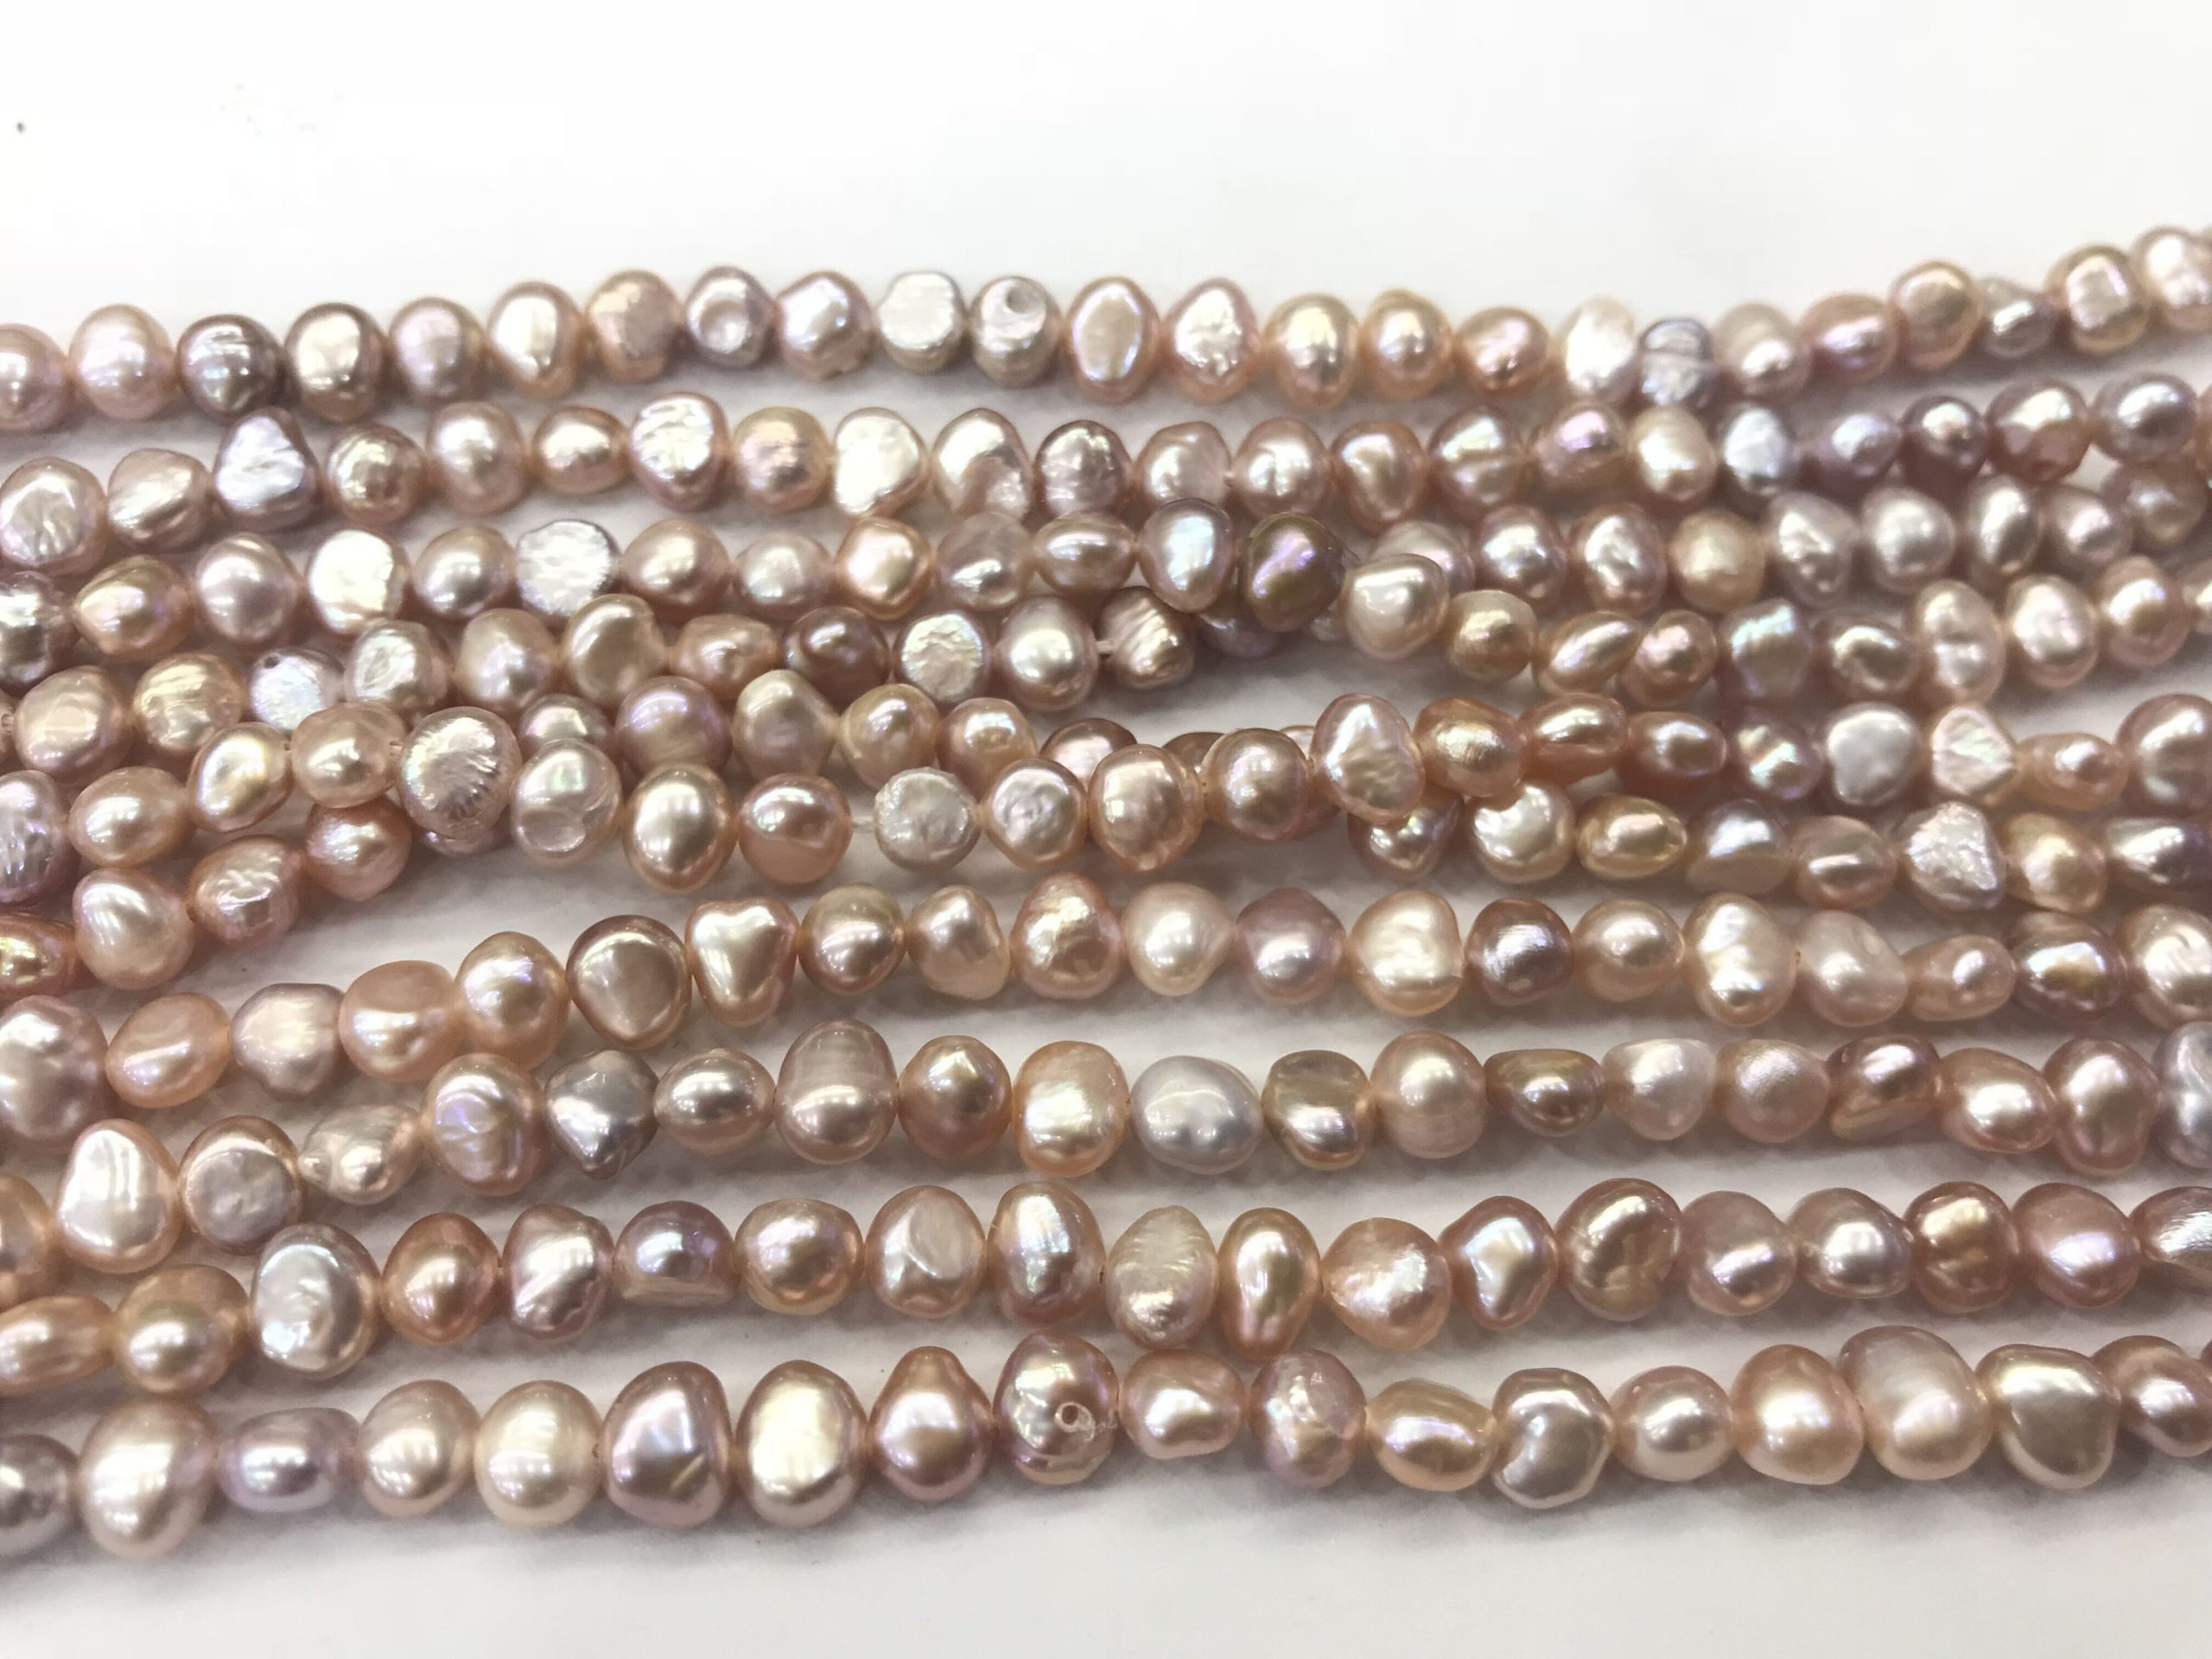 Natural Freeshape Purple Freshwater Pearl Nugget Grade A Twilight Loose Beads 14inch Jewelry Supply Bracelet Necklace Material Support